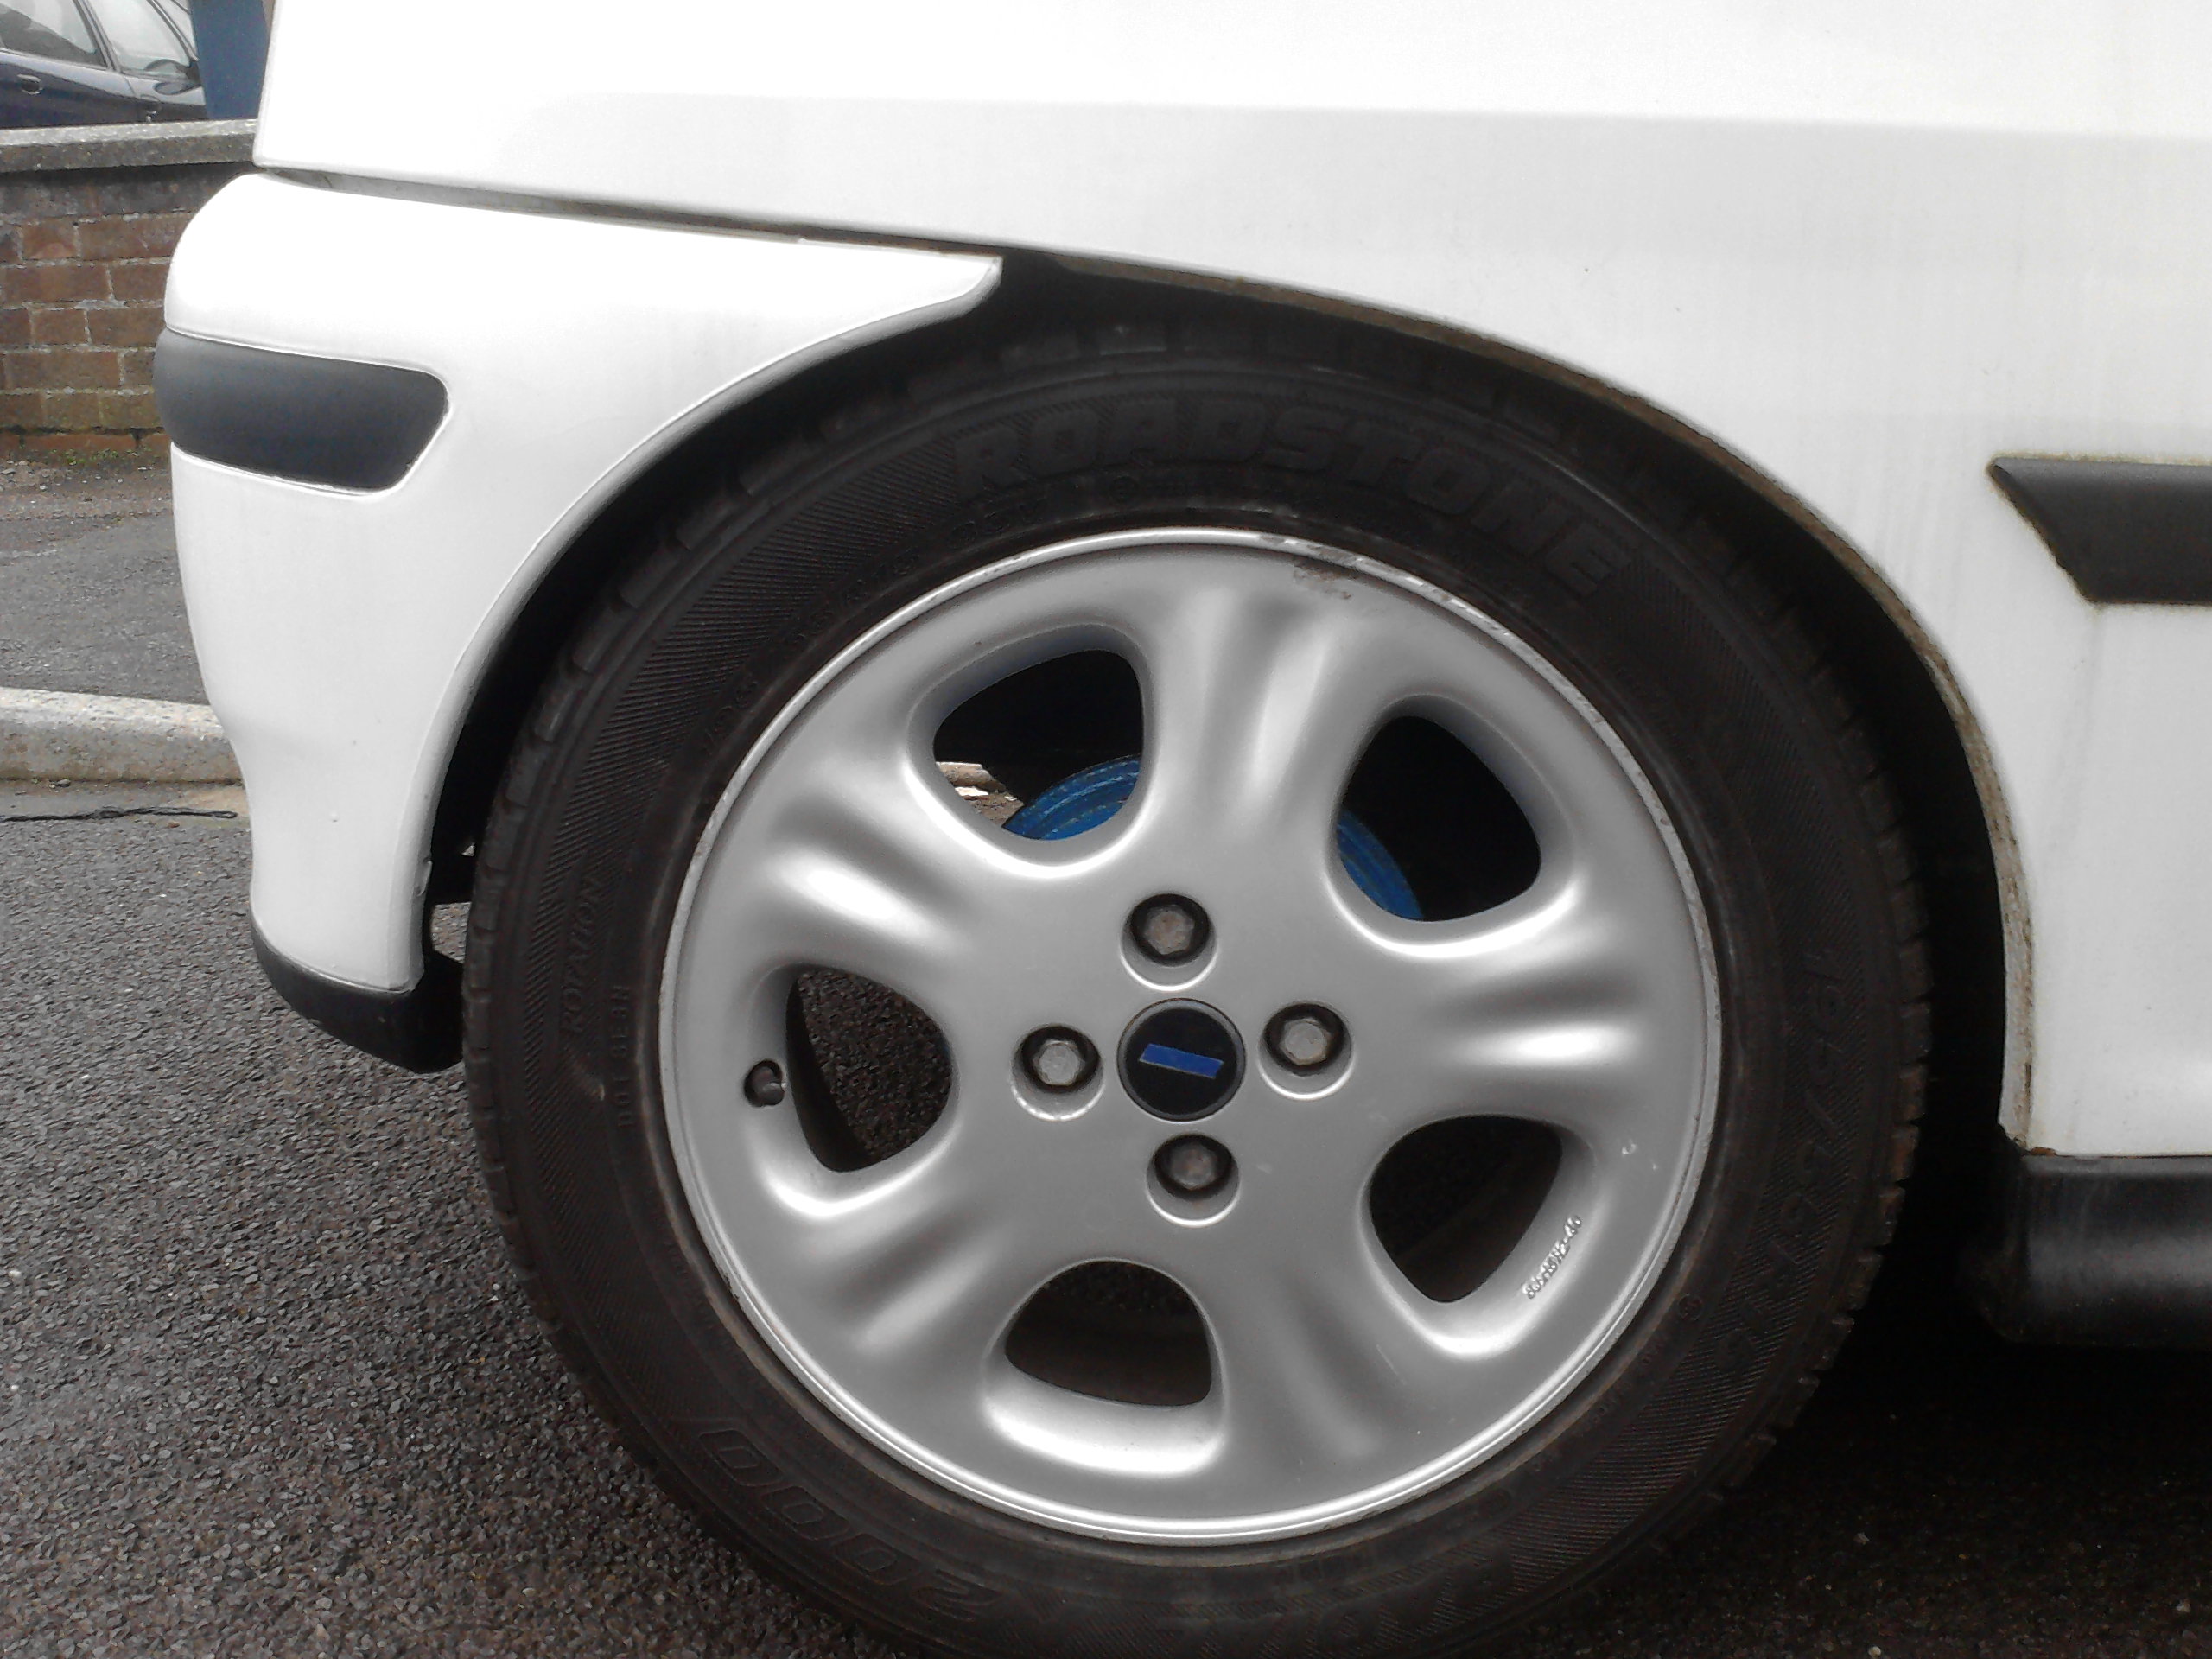 Cabriolet wheel clearance